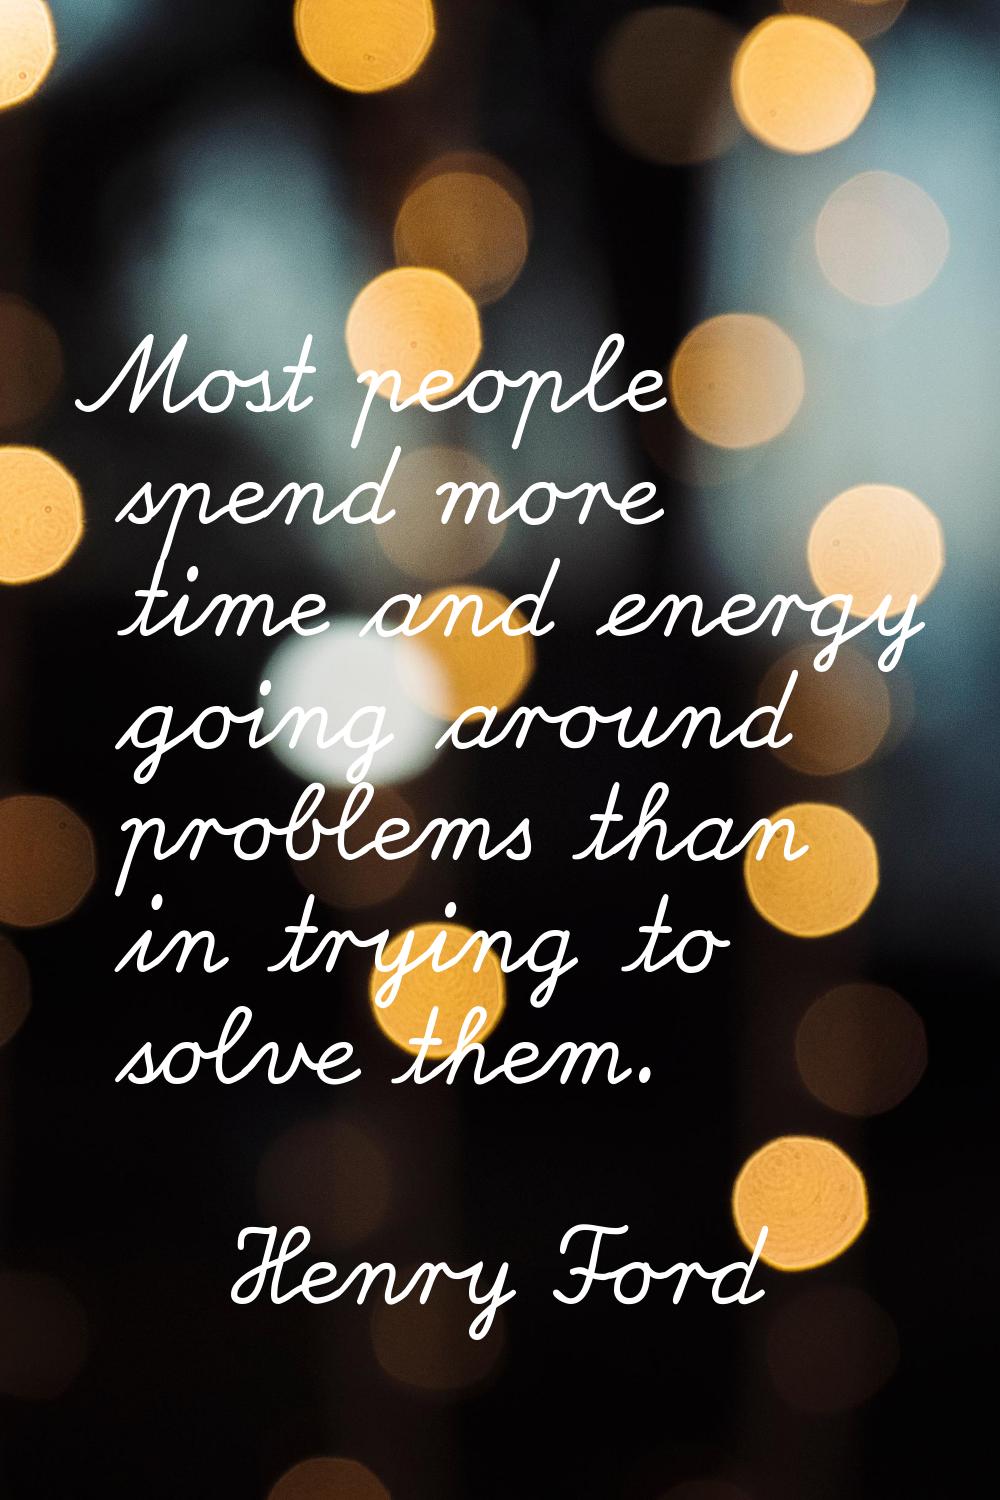 Most people spend more time and energy going around problems than in trying to solve them.